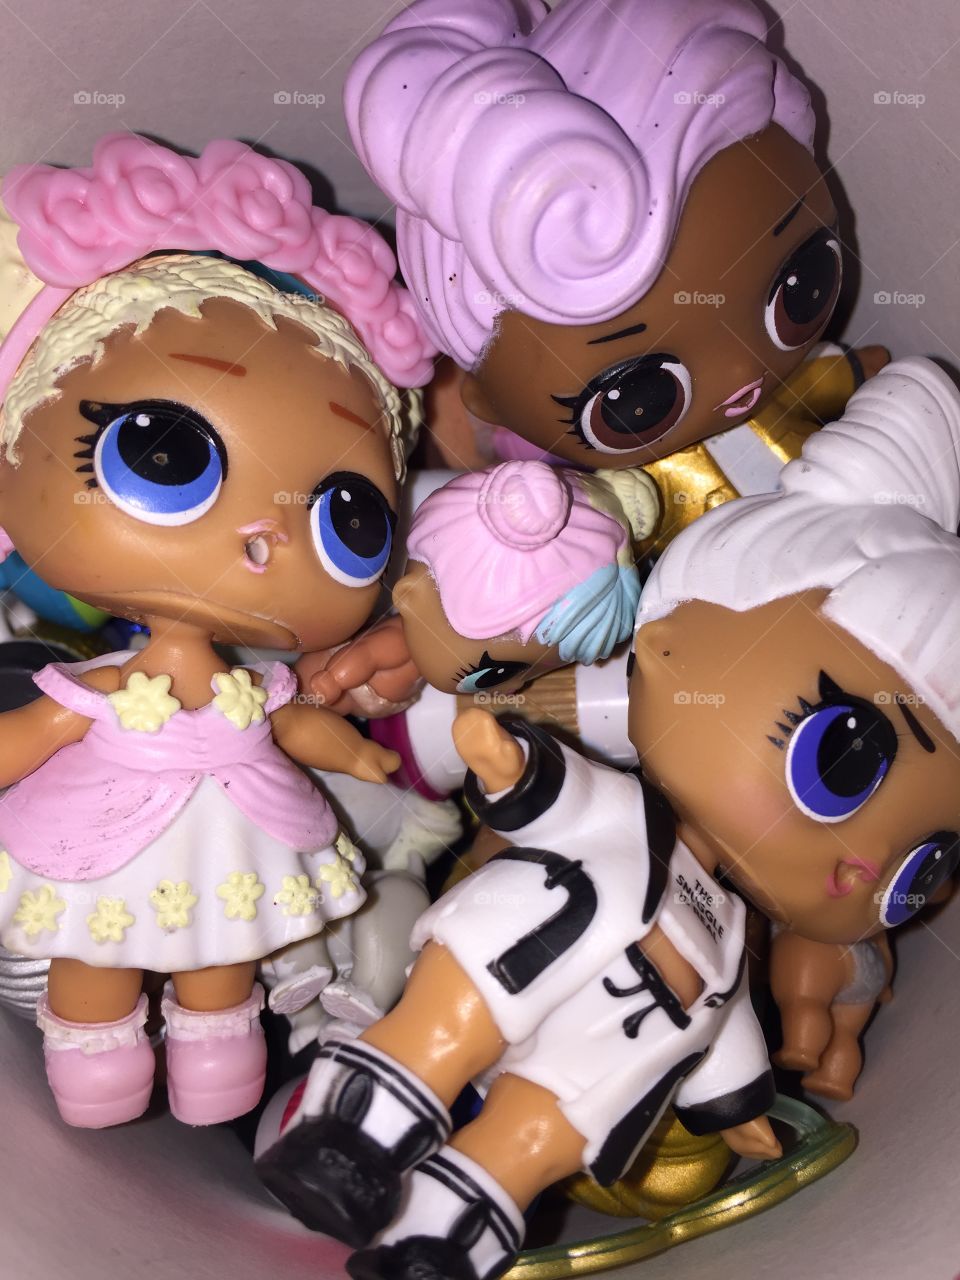 These are such cute dolls that live in my daughter's secret box